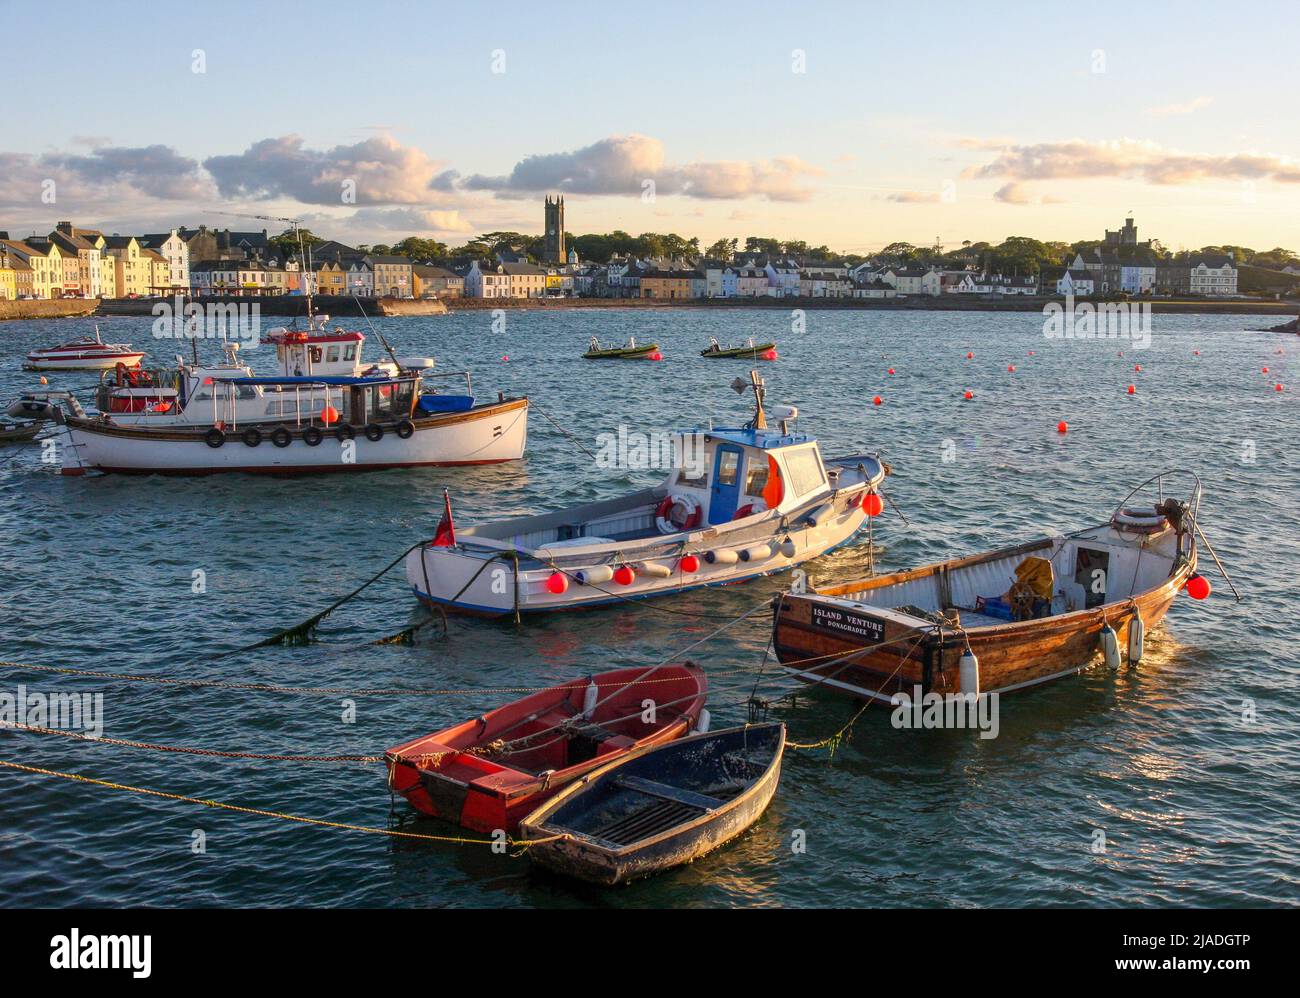 Summer evening sun on seafront promenade and boats moored in harbour on County Down coast - seaside town Donaghadee, Northern Ireland. Stock Photo